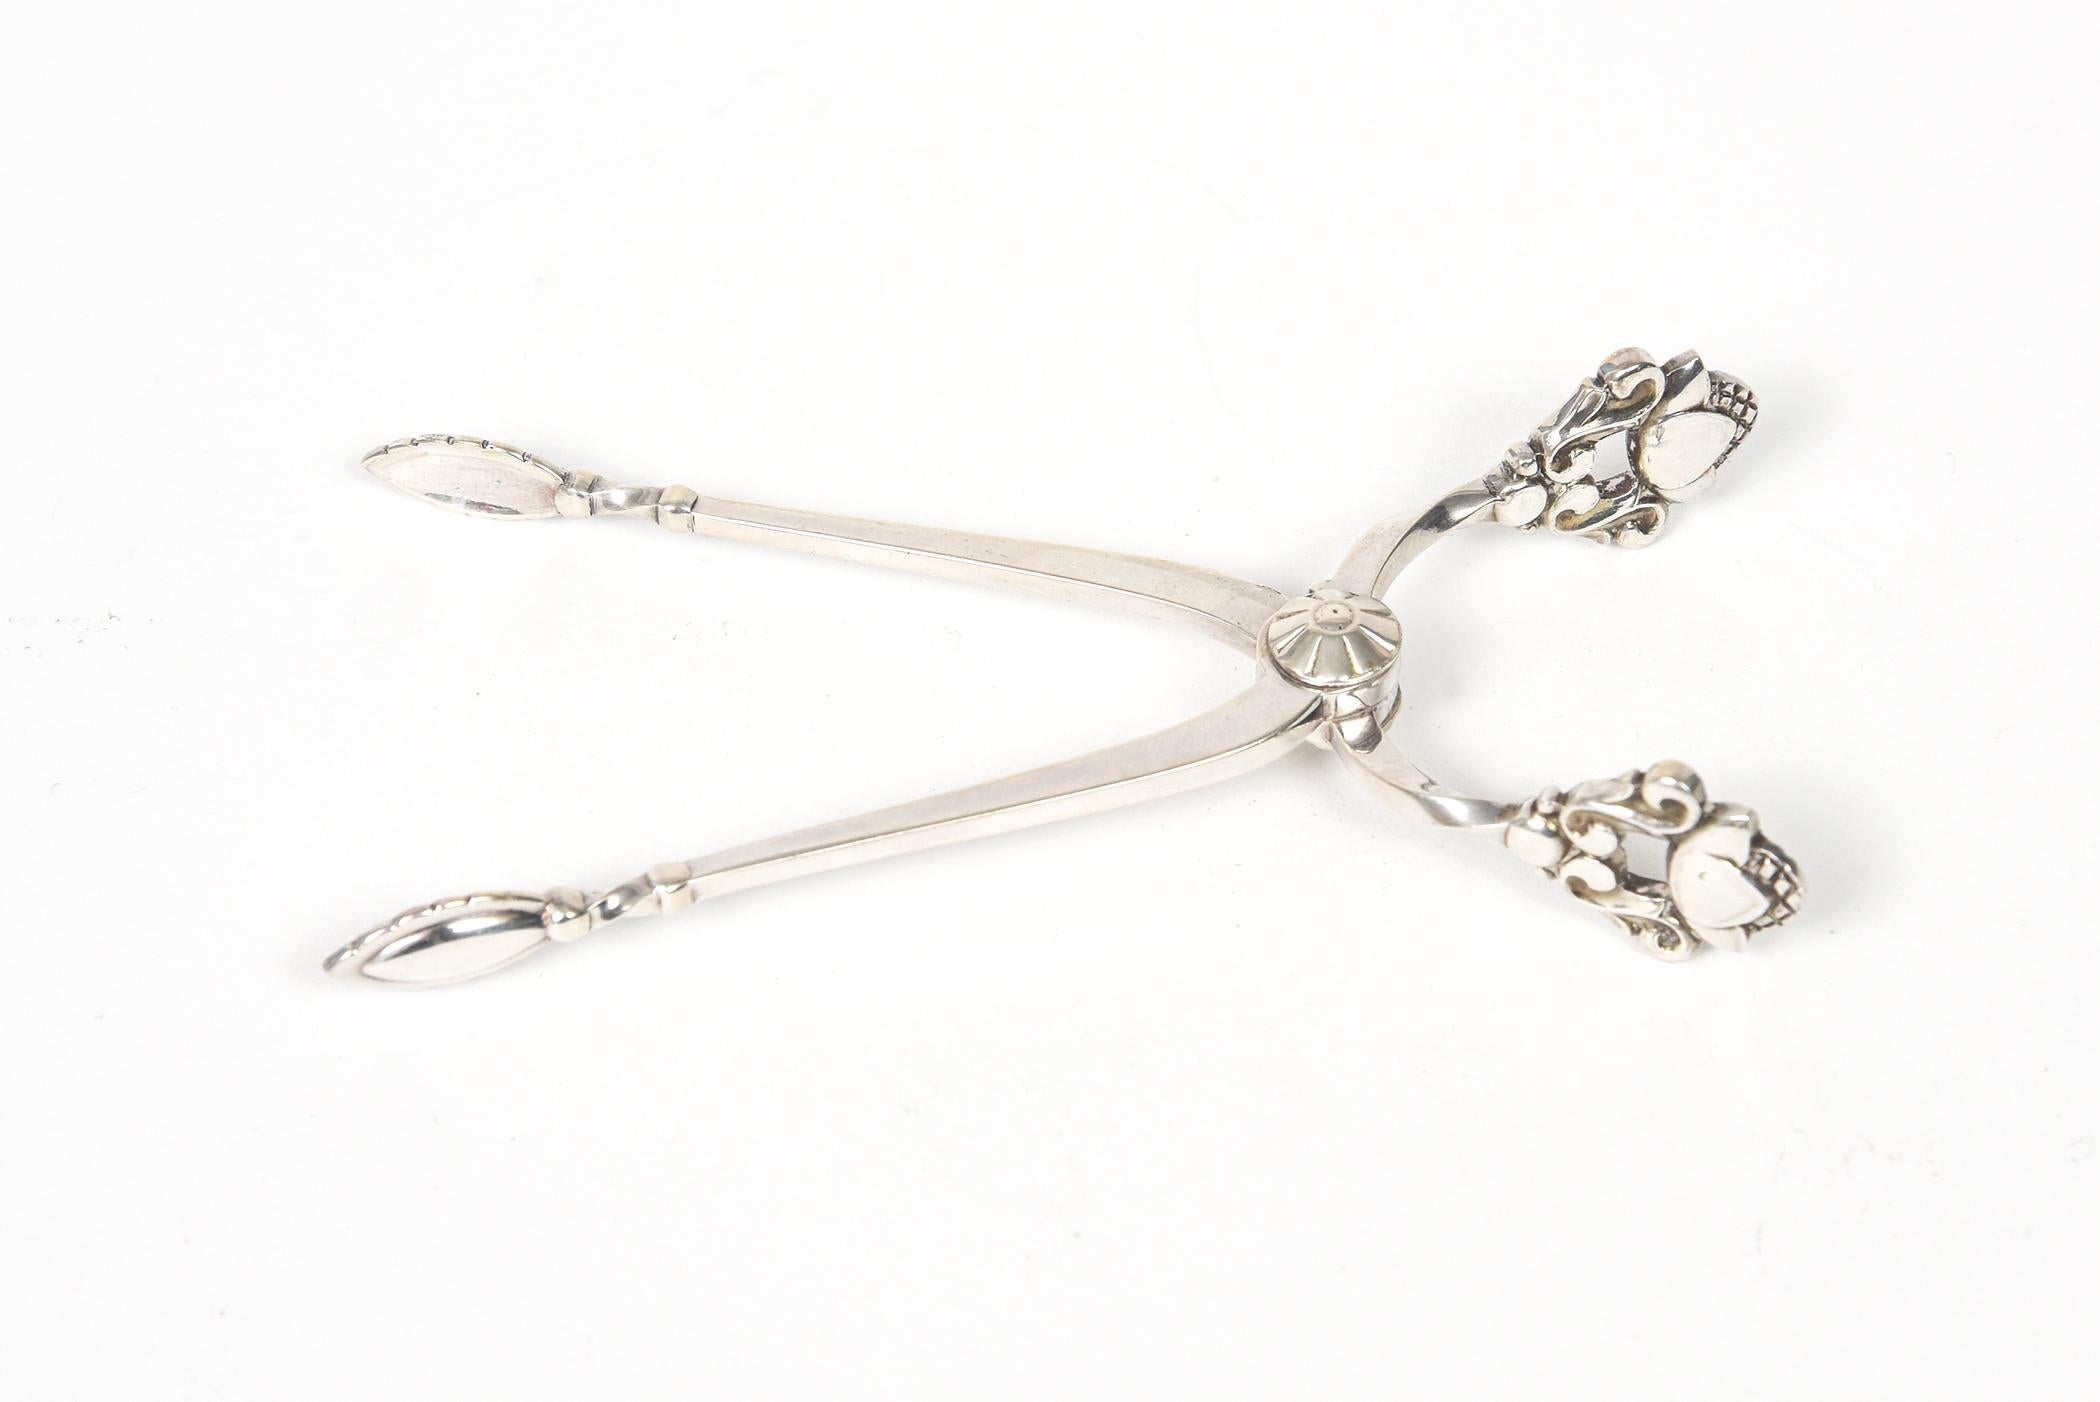 Vintage Georg Jensen sterling silver scissor shape sugar tongs from the acorn pattern introduced in 1915. Marked Sterling Denmark Georg Jensen. Current Retail is $550.